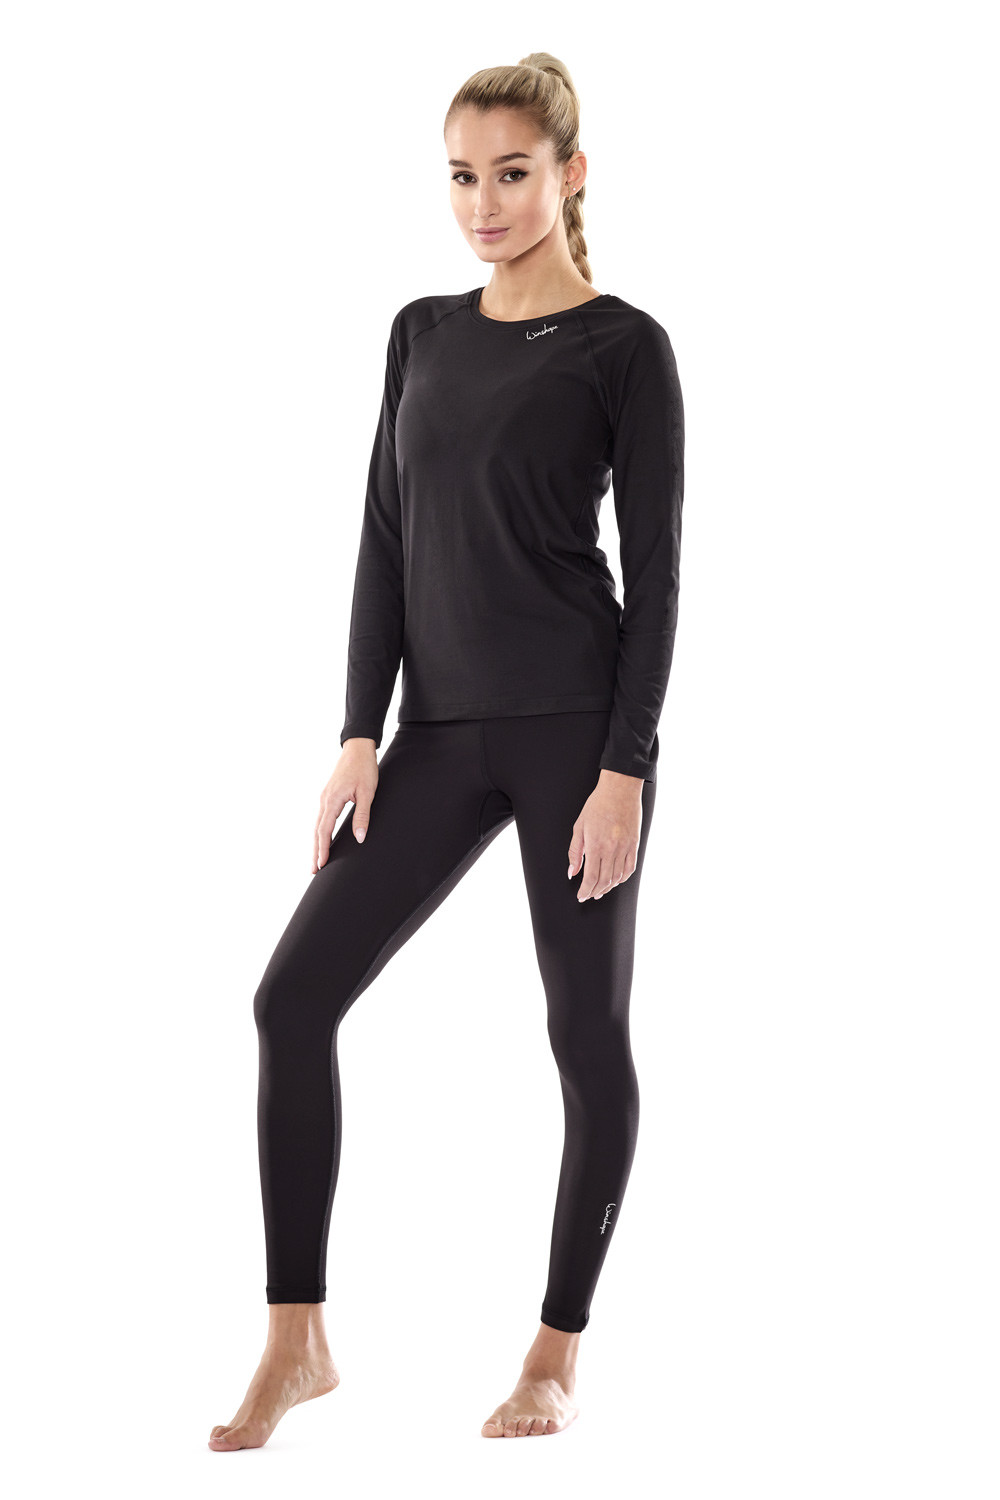 Functional Light Soft and Style Sleeve Soft Winshape Ultra schwarz, Long AET118LS, Top